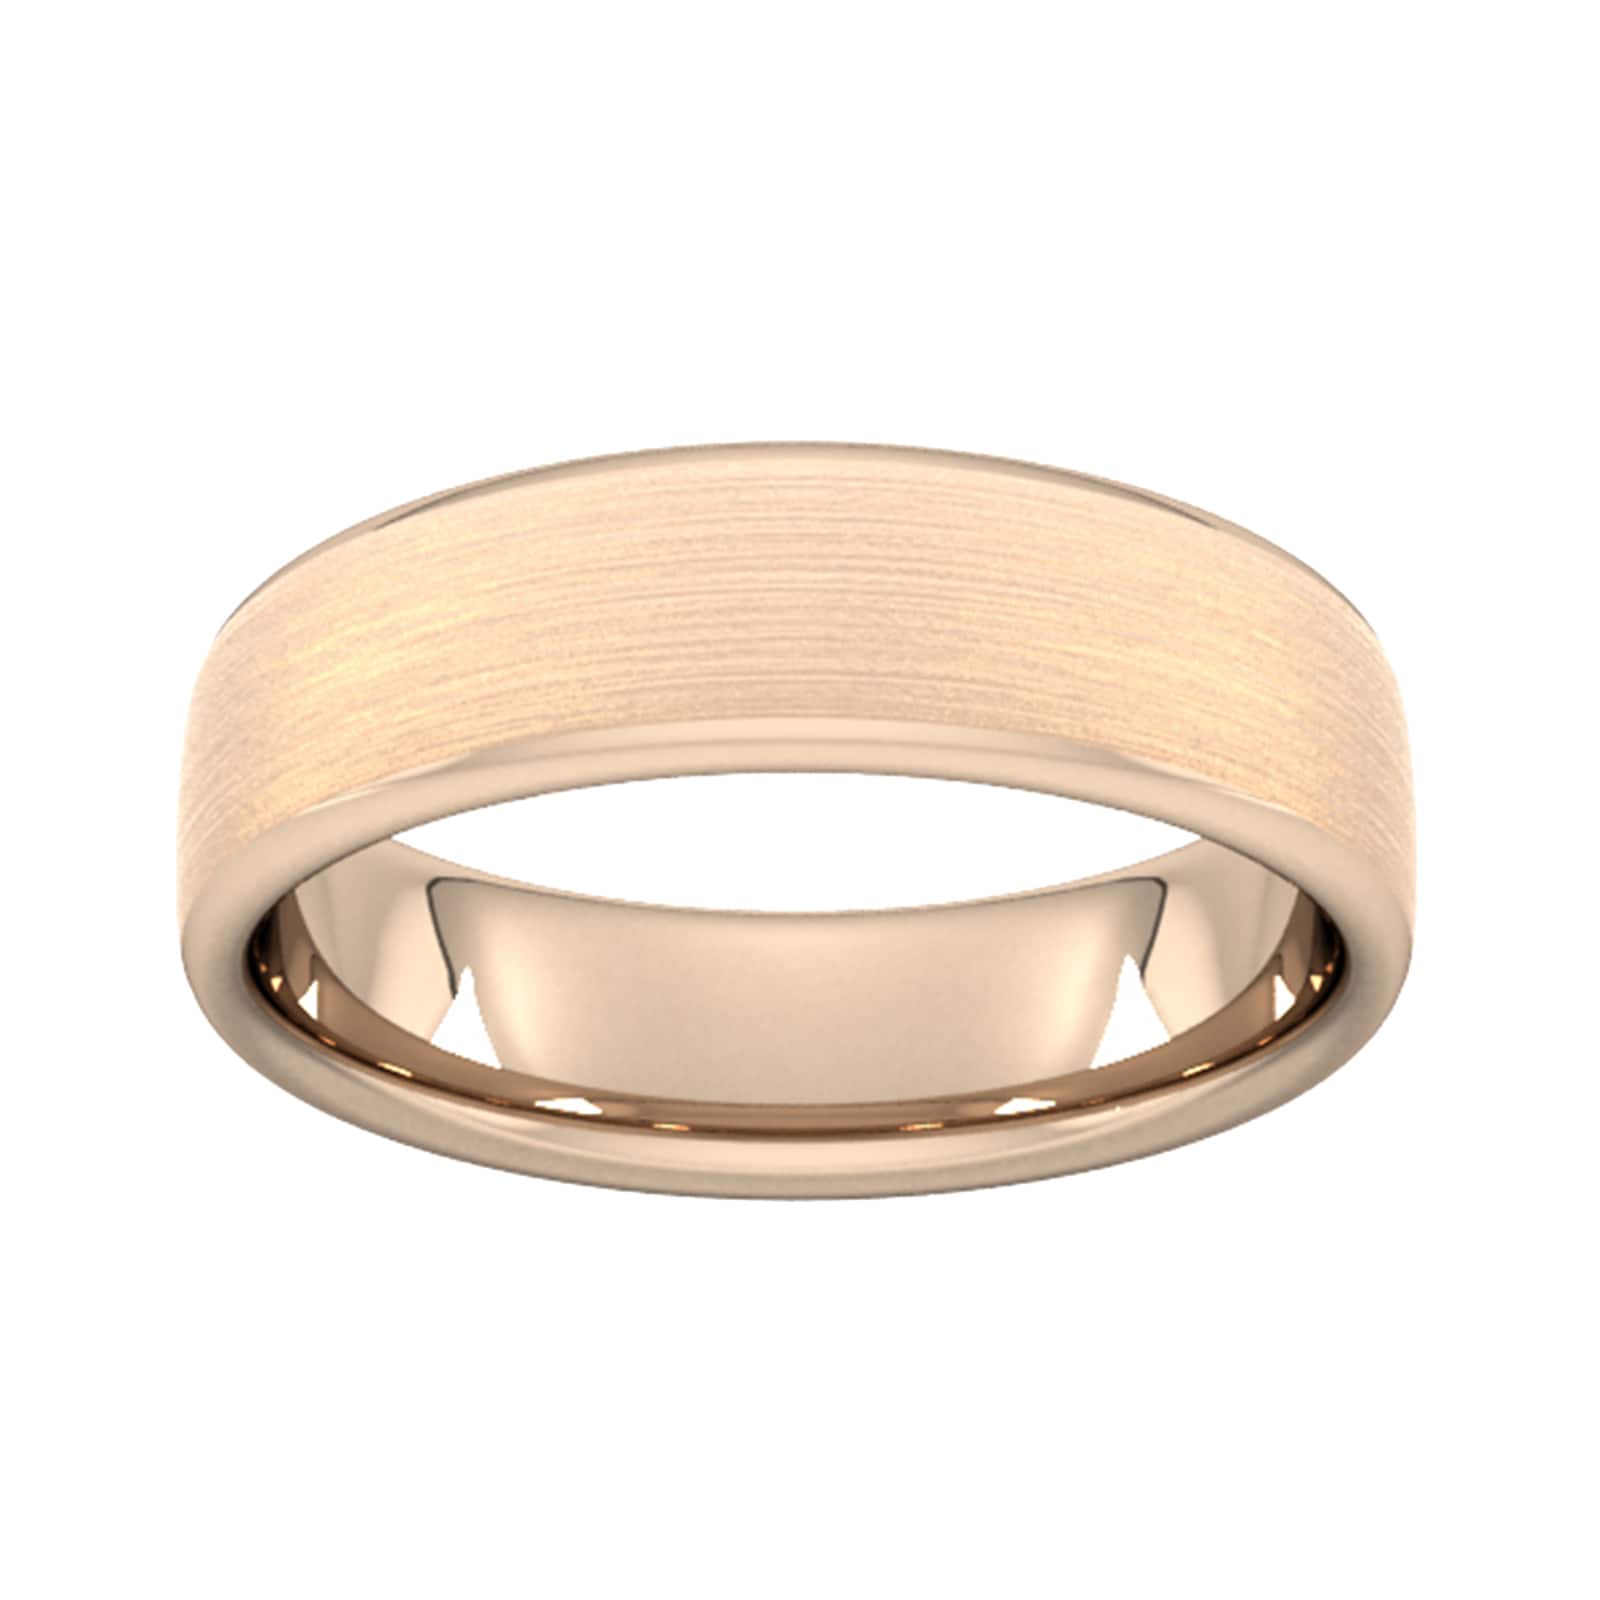 6mm D Shape Heavy Matt Finished Wedding Ring In 9 Carat Rose Gold - Ring Size X